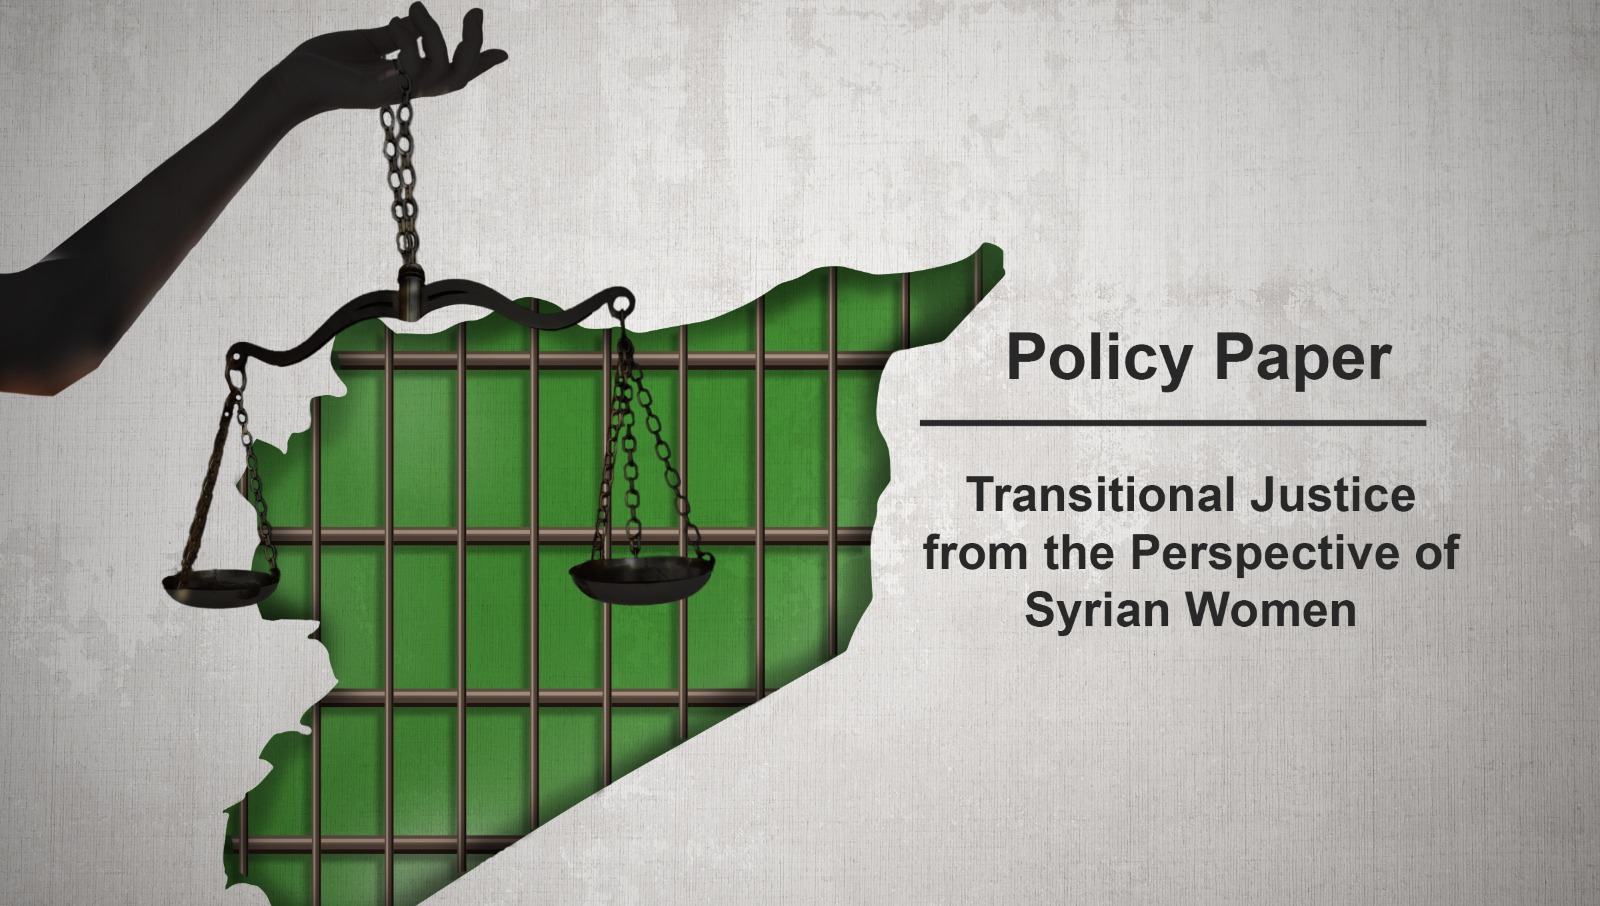 Policy Paper – Transitional Justice from the Perspective of Syrian Women